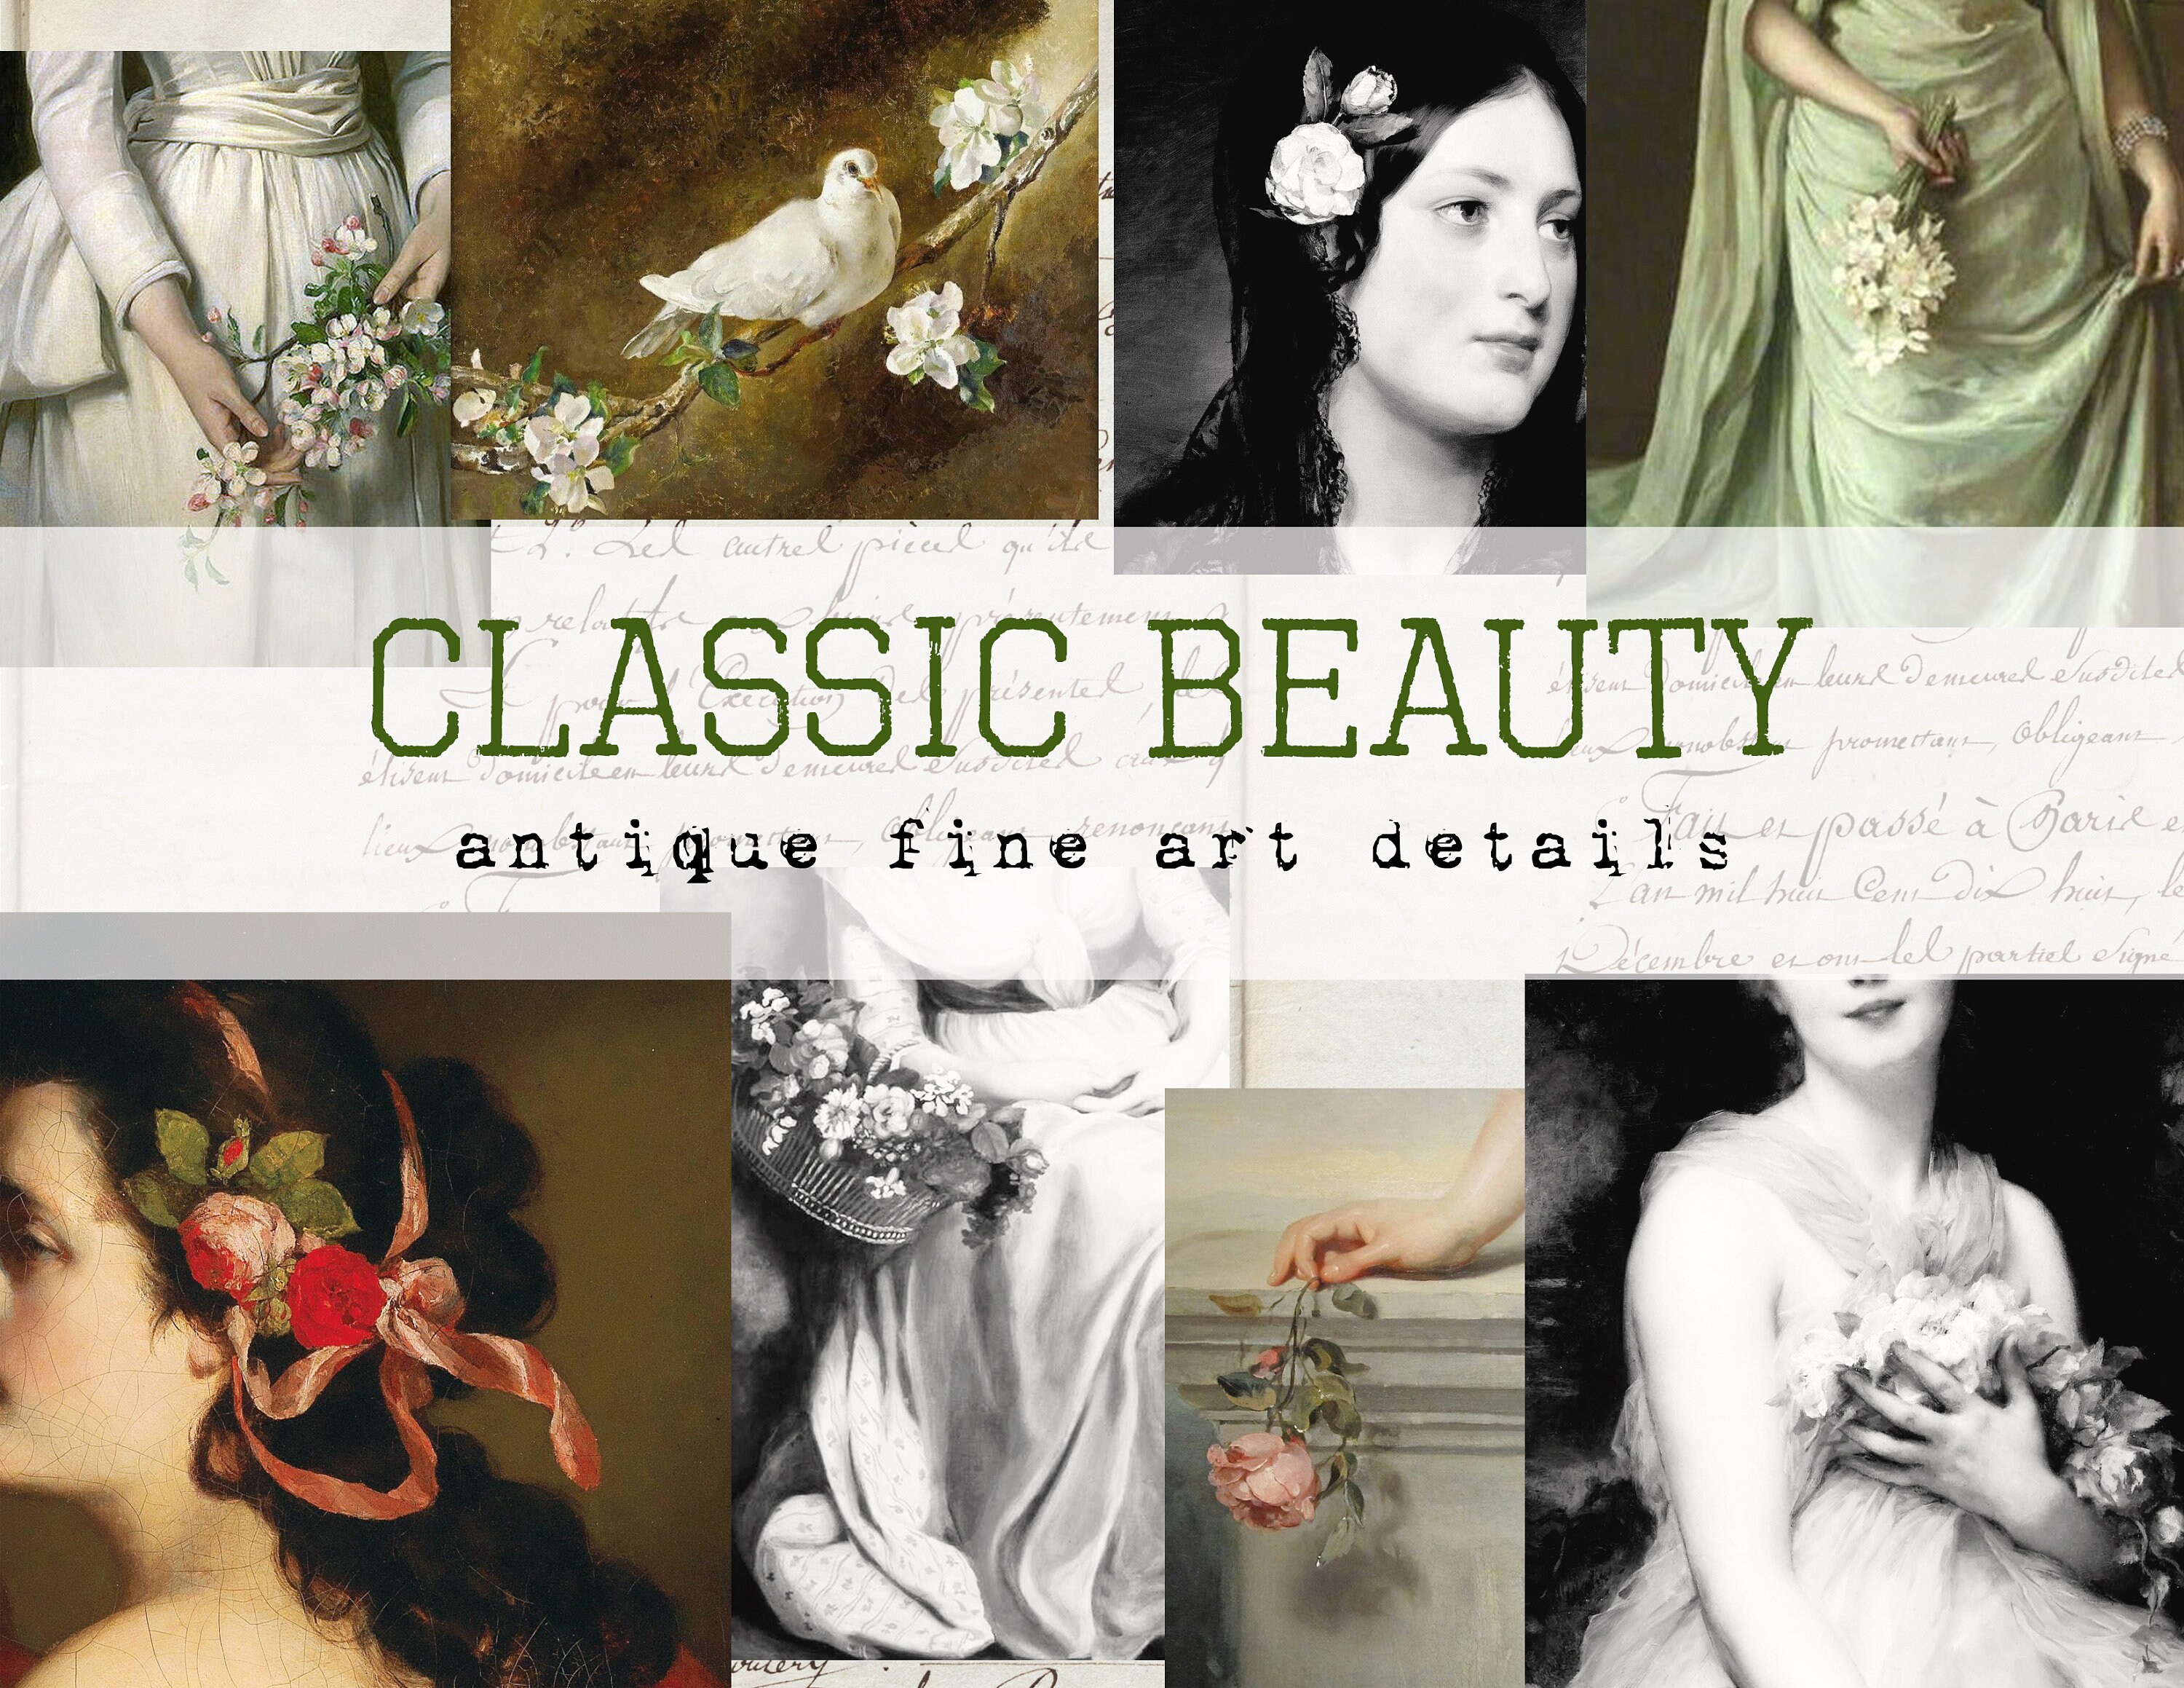 art　Beauty　collection　Classic　Etsy　details　A　for　collage　of　fine　日本